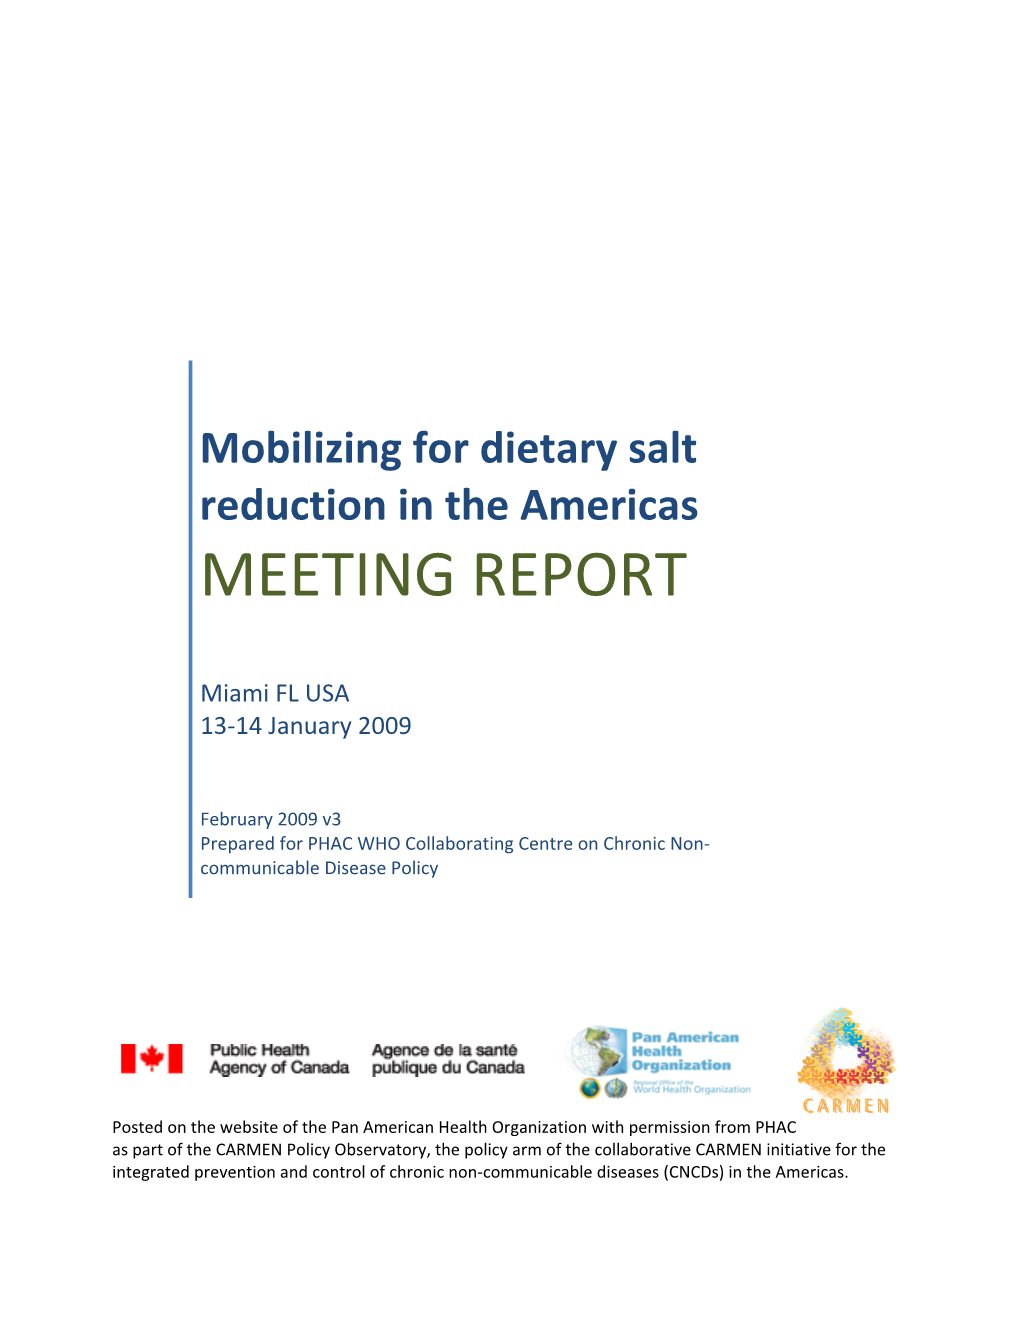 Mobilizing for Dietary Salt Reduction in the Americas MEETING REPORT